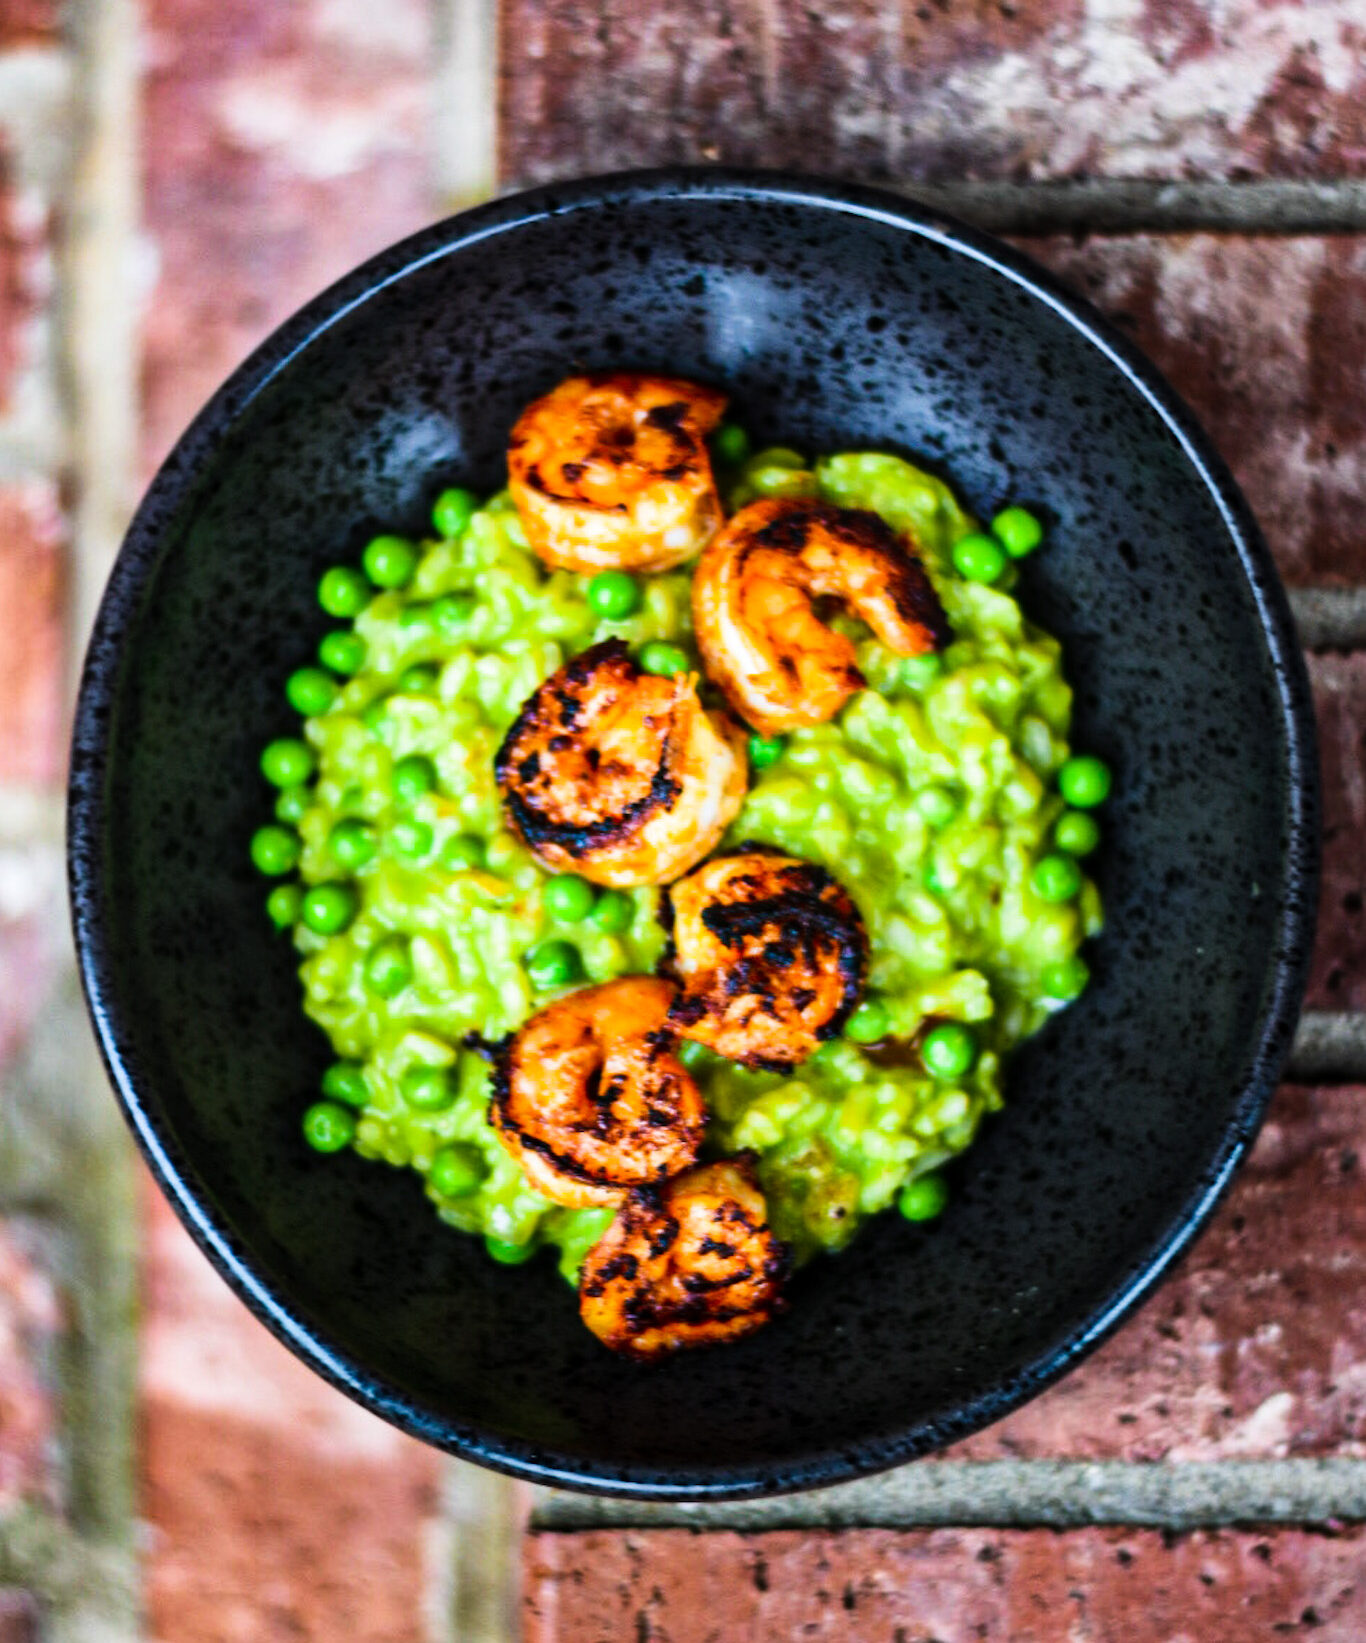 pea risotto and grilled shrimp